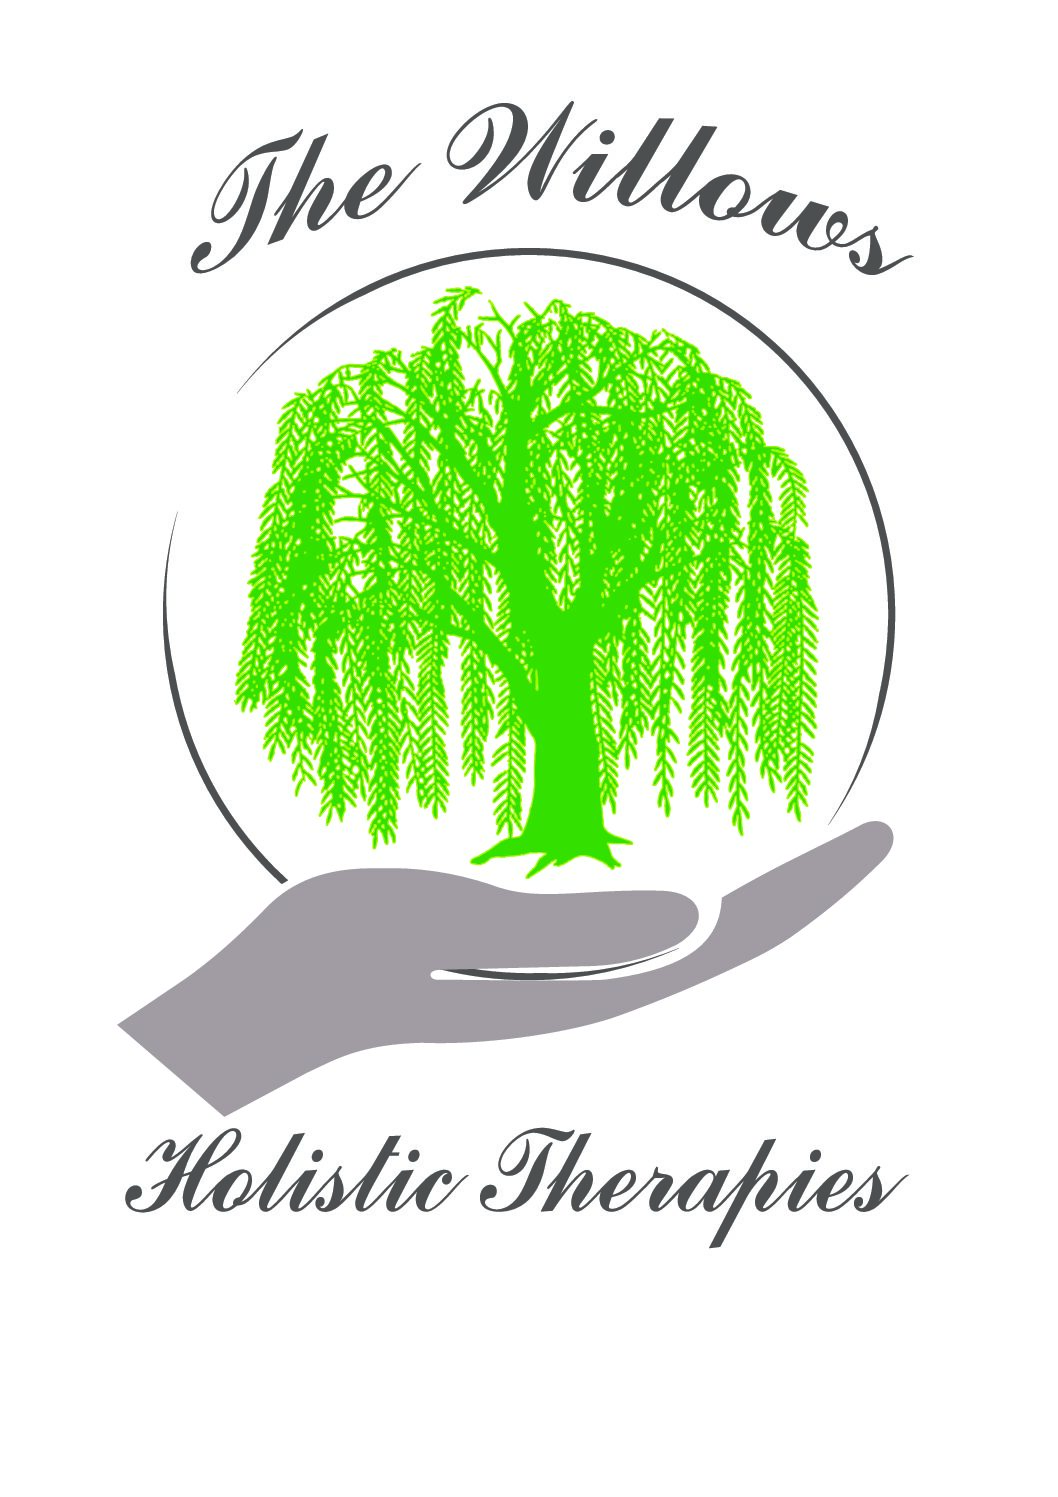 The Willows Holistic Therapies